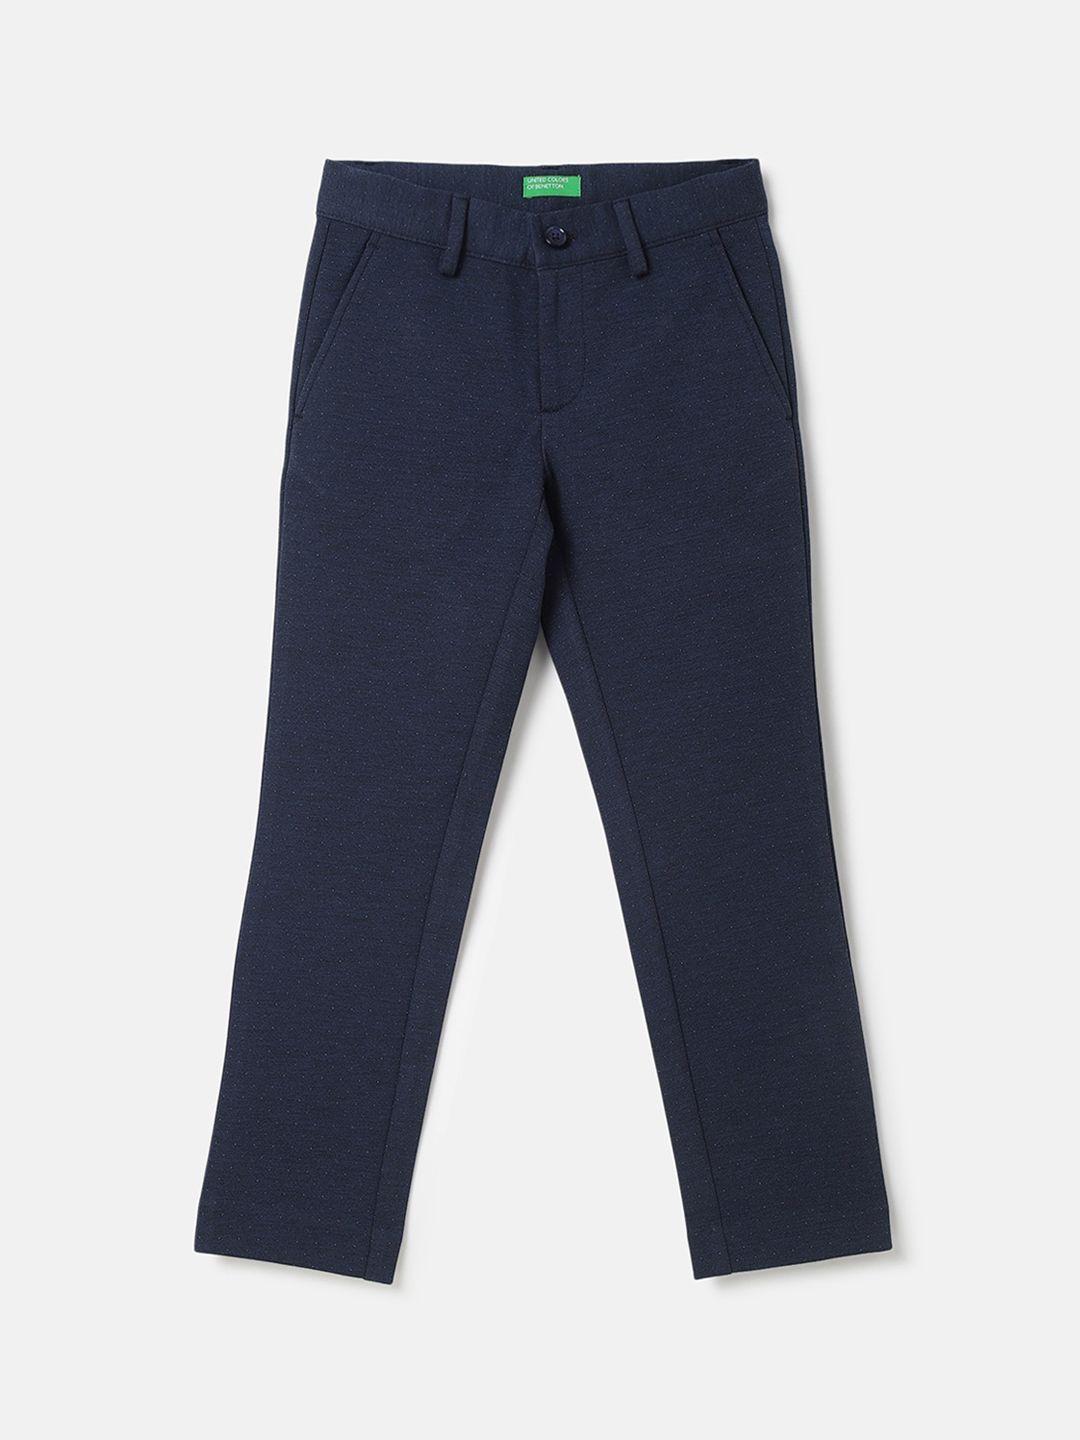 united-colors-of-benetton-boys-textured-cotton-regular-fit-trousers